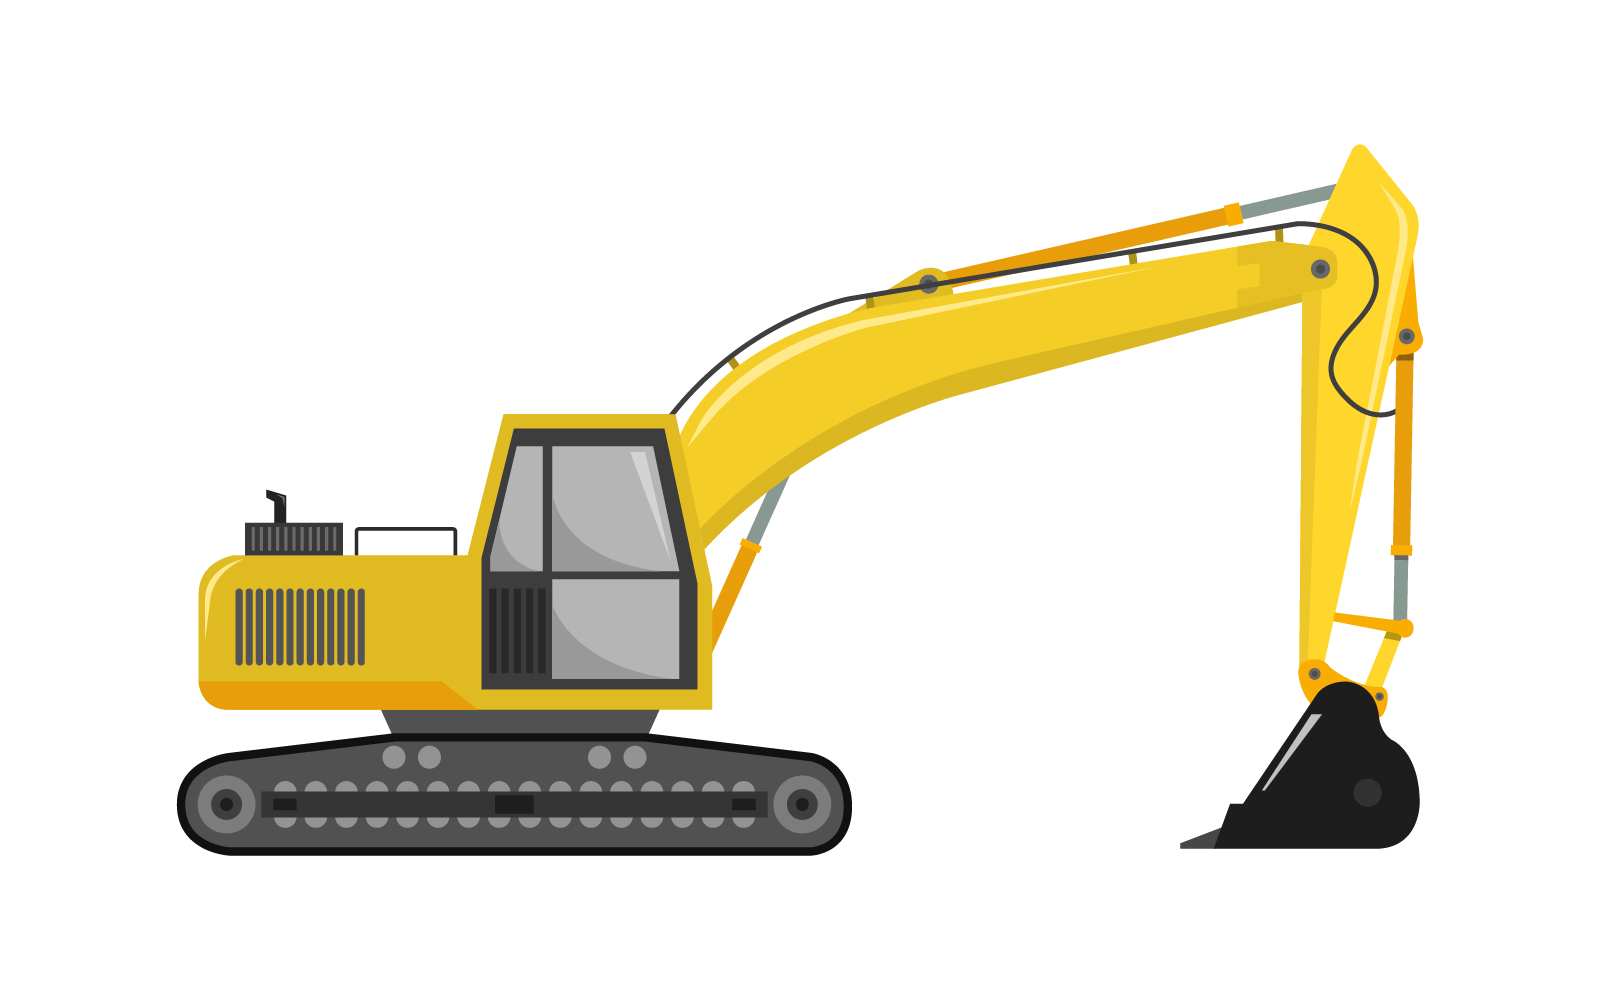 Excavator illustrated and colored on a white background